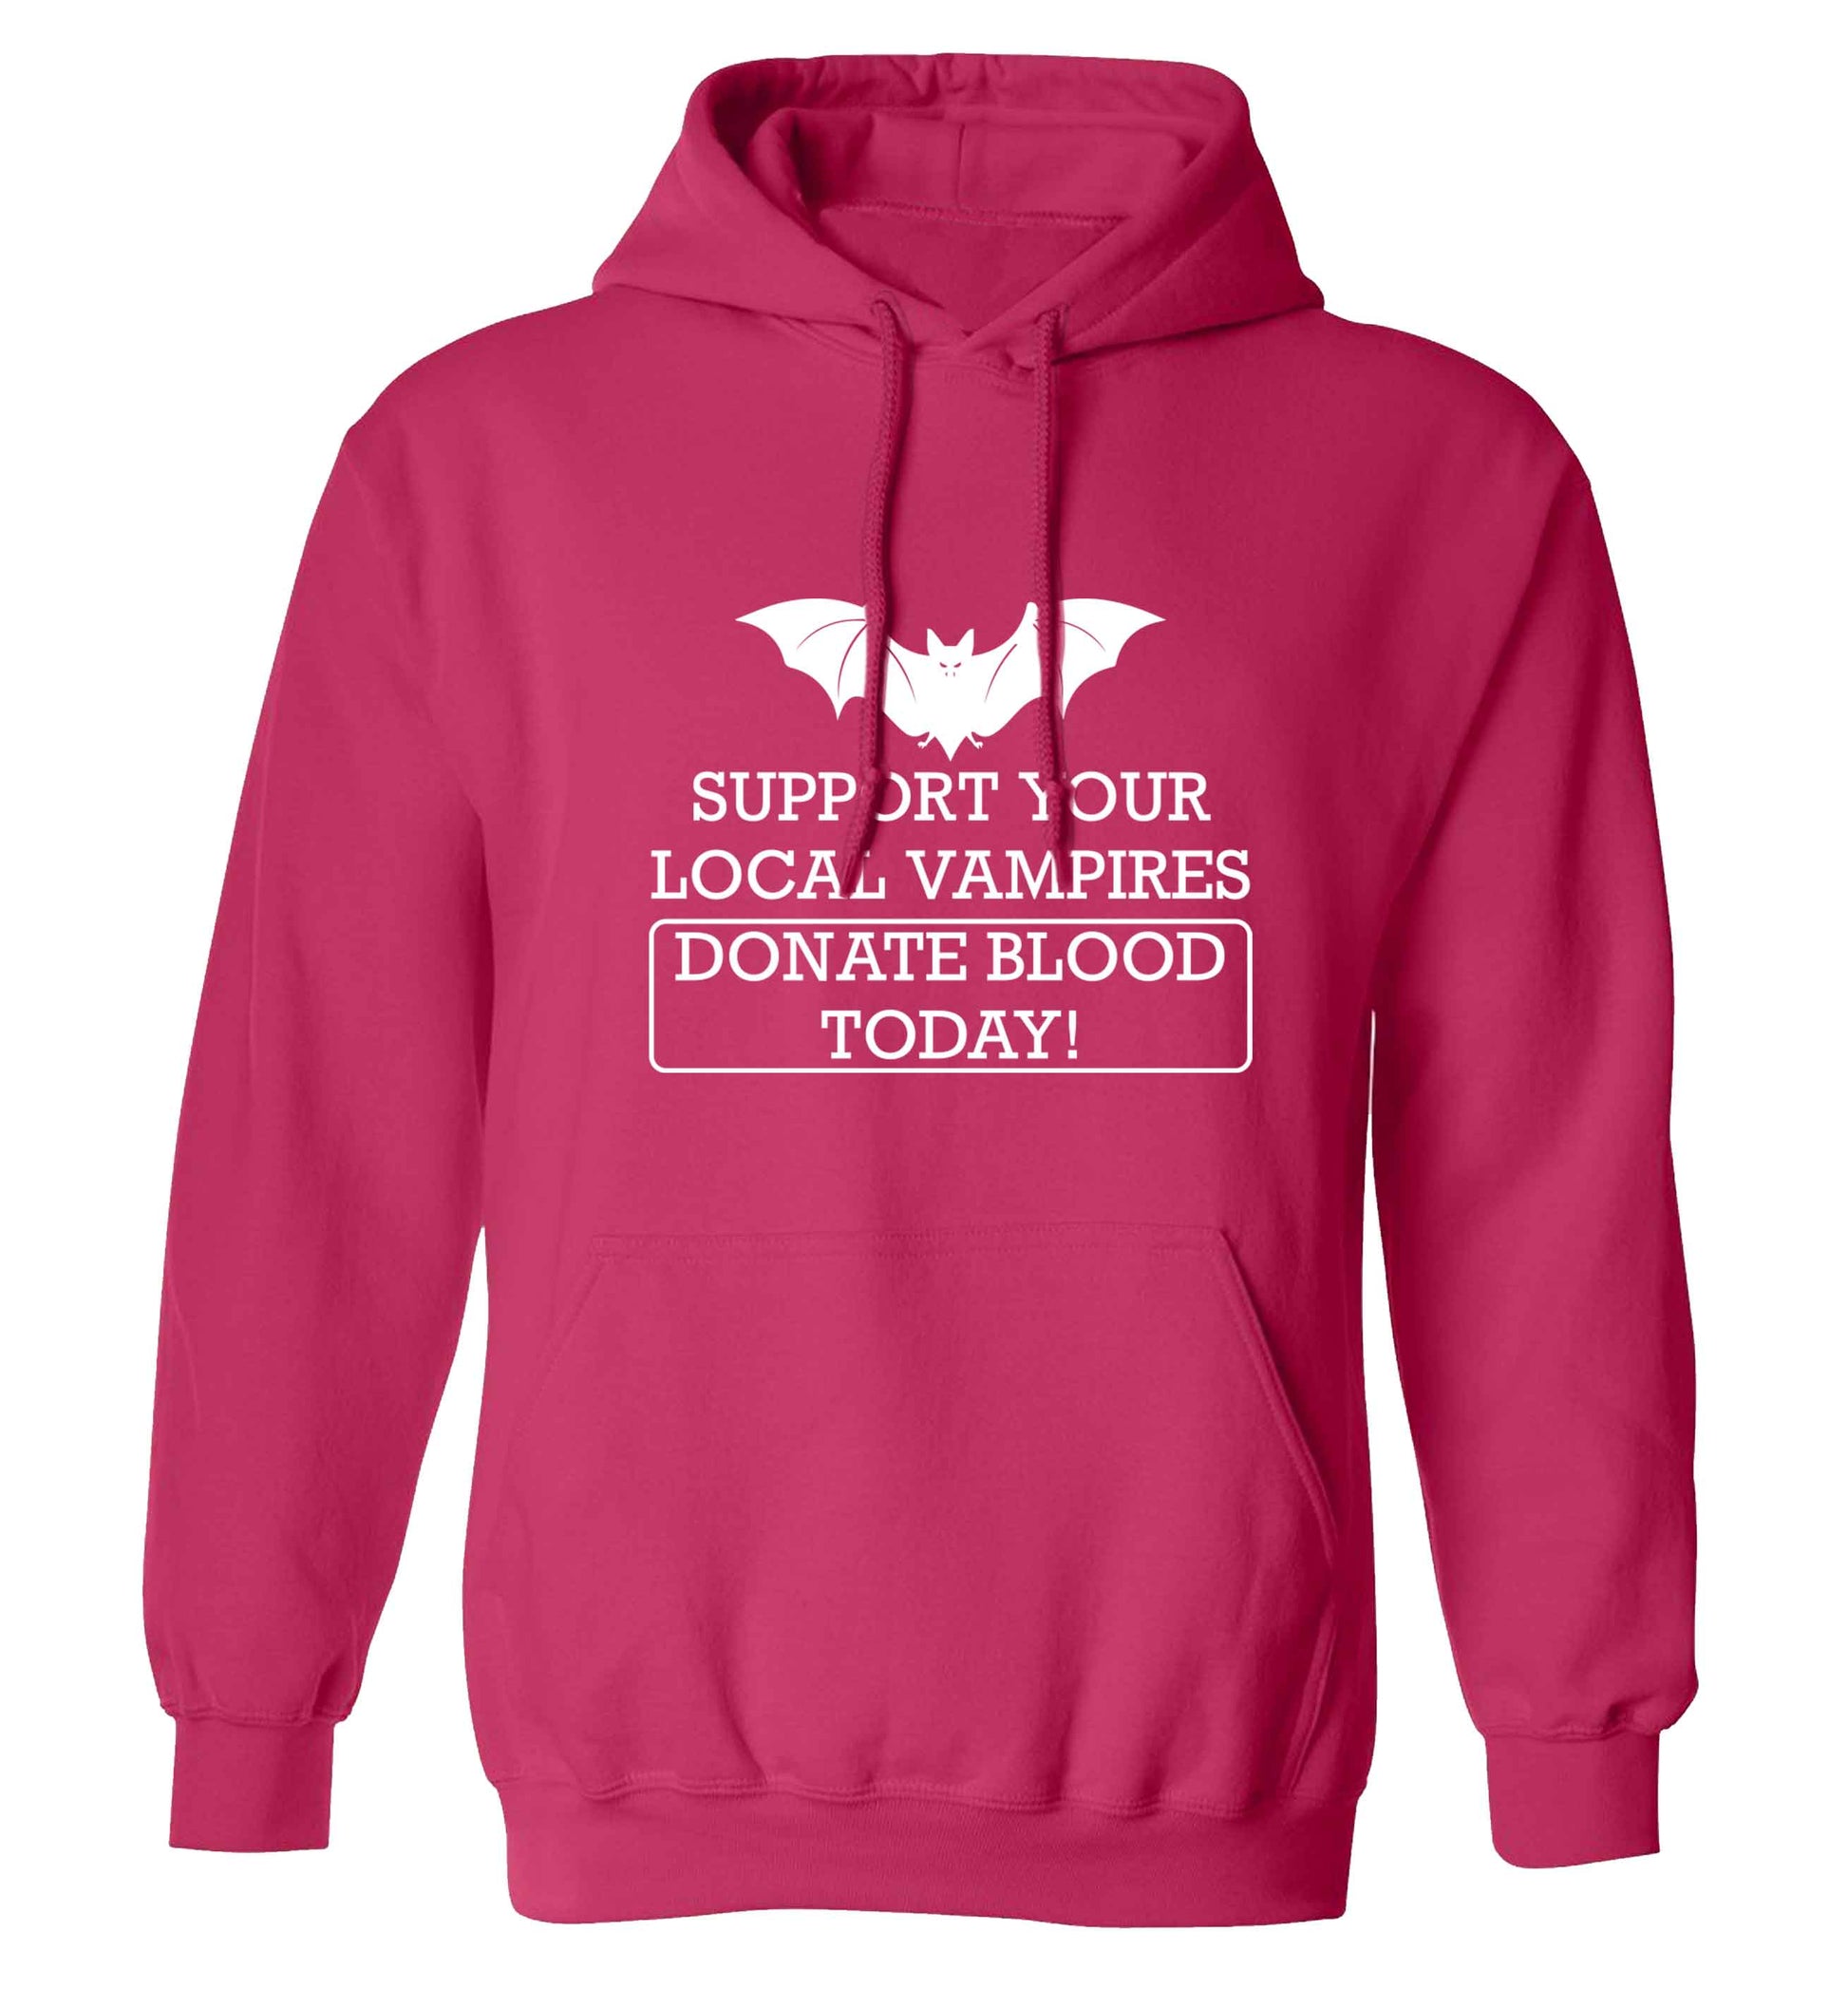 Support your local vampires donate blood today! adults unisex pink hoodie 2XL